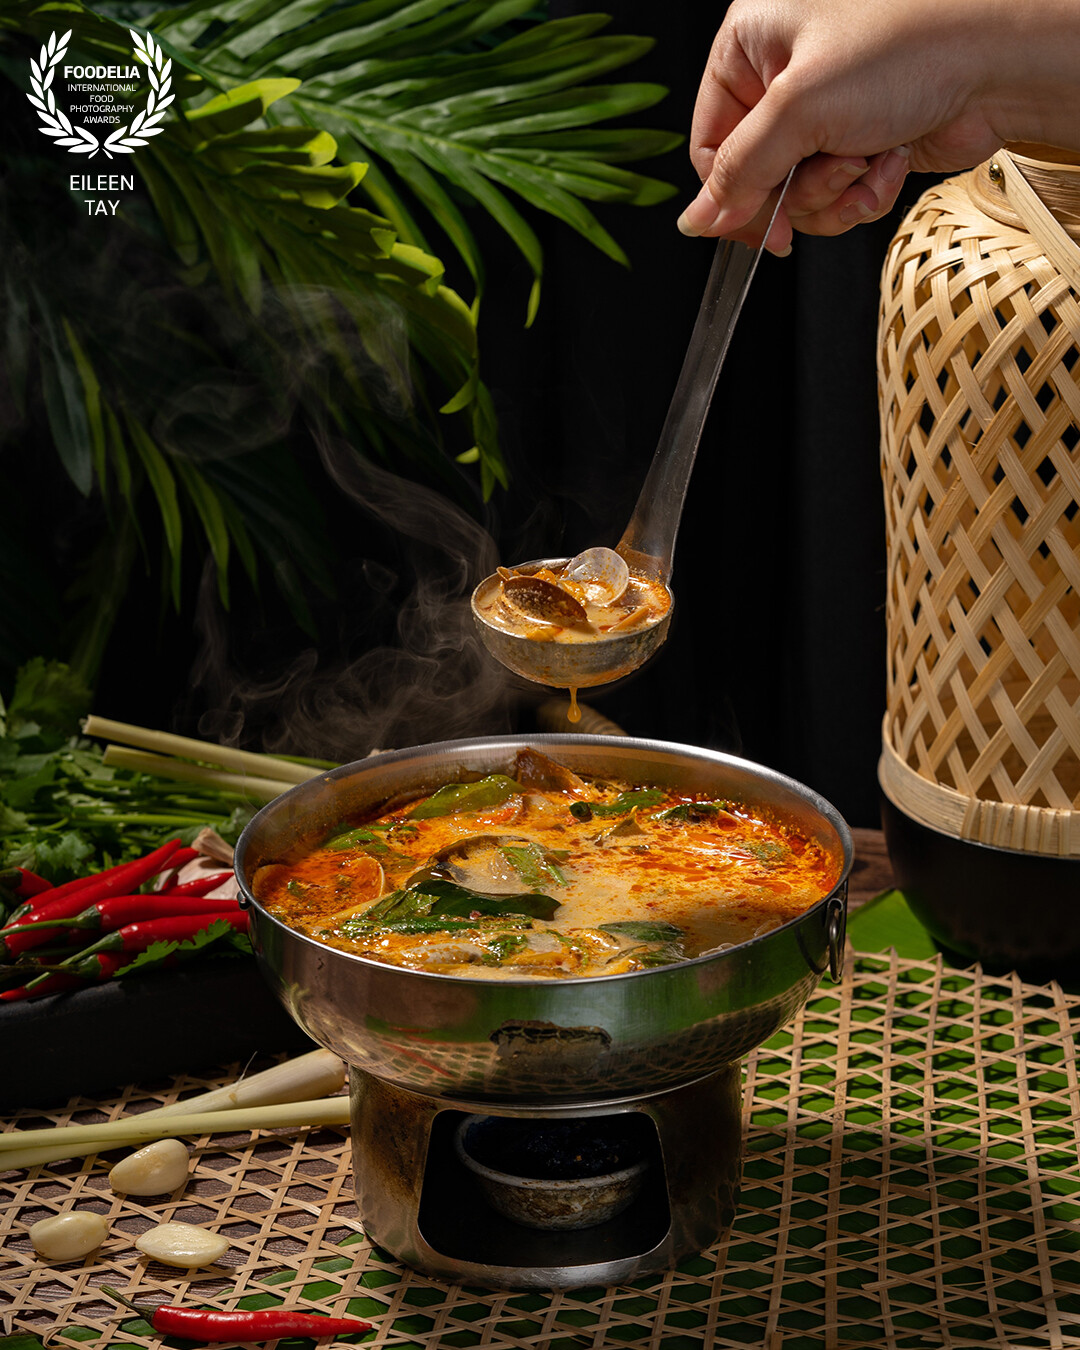 Shot this visual for a Thai restaurant in Malaysia.<br />
<br />
Tom Yum Goong is one of the most exquisite dishes of Thai cuisine. Thai cuisine is known for its rich and vibrant colors. Therefore, we used a variety of colorful ingredients like fresh herbs (cilantro, basil, mint), vegetables, and exotic spices to add visual appeal to the composition.